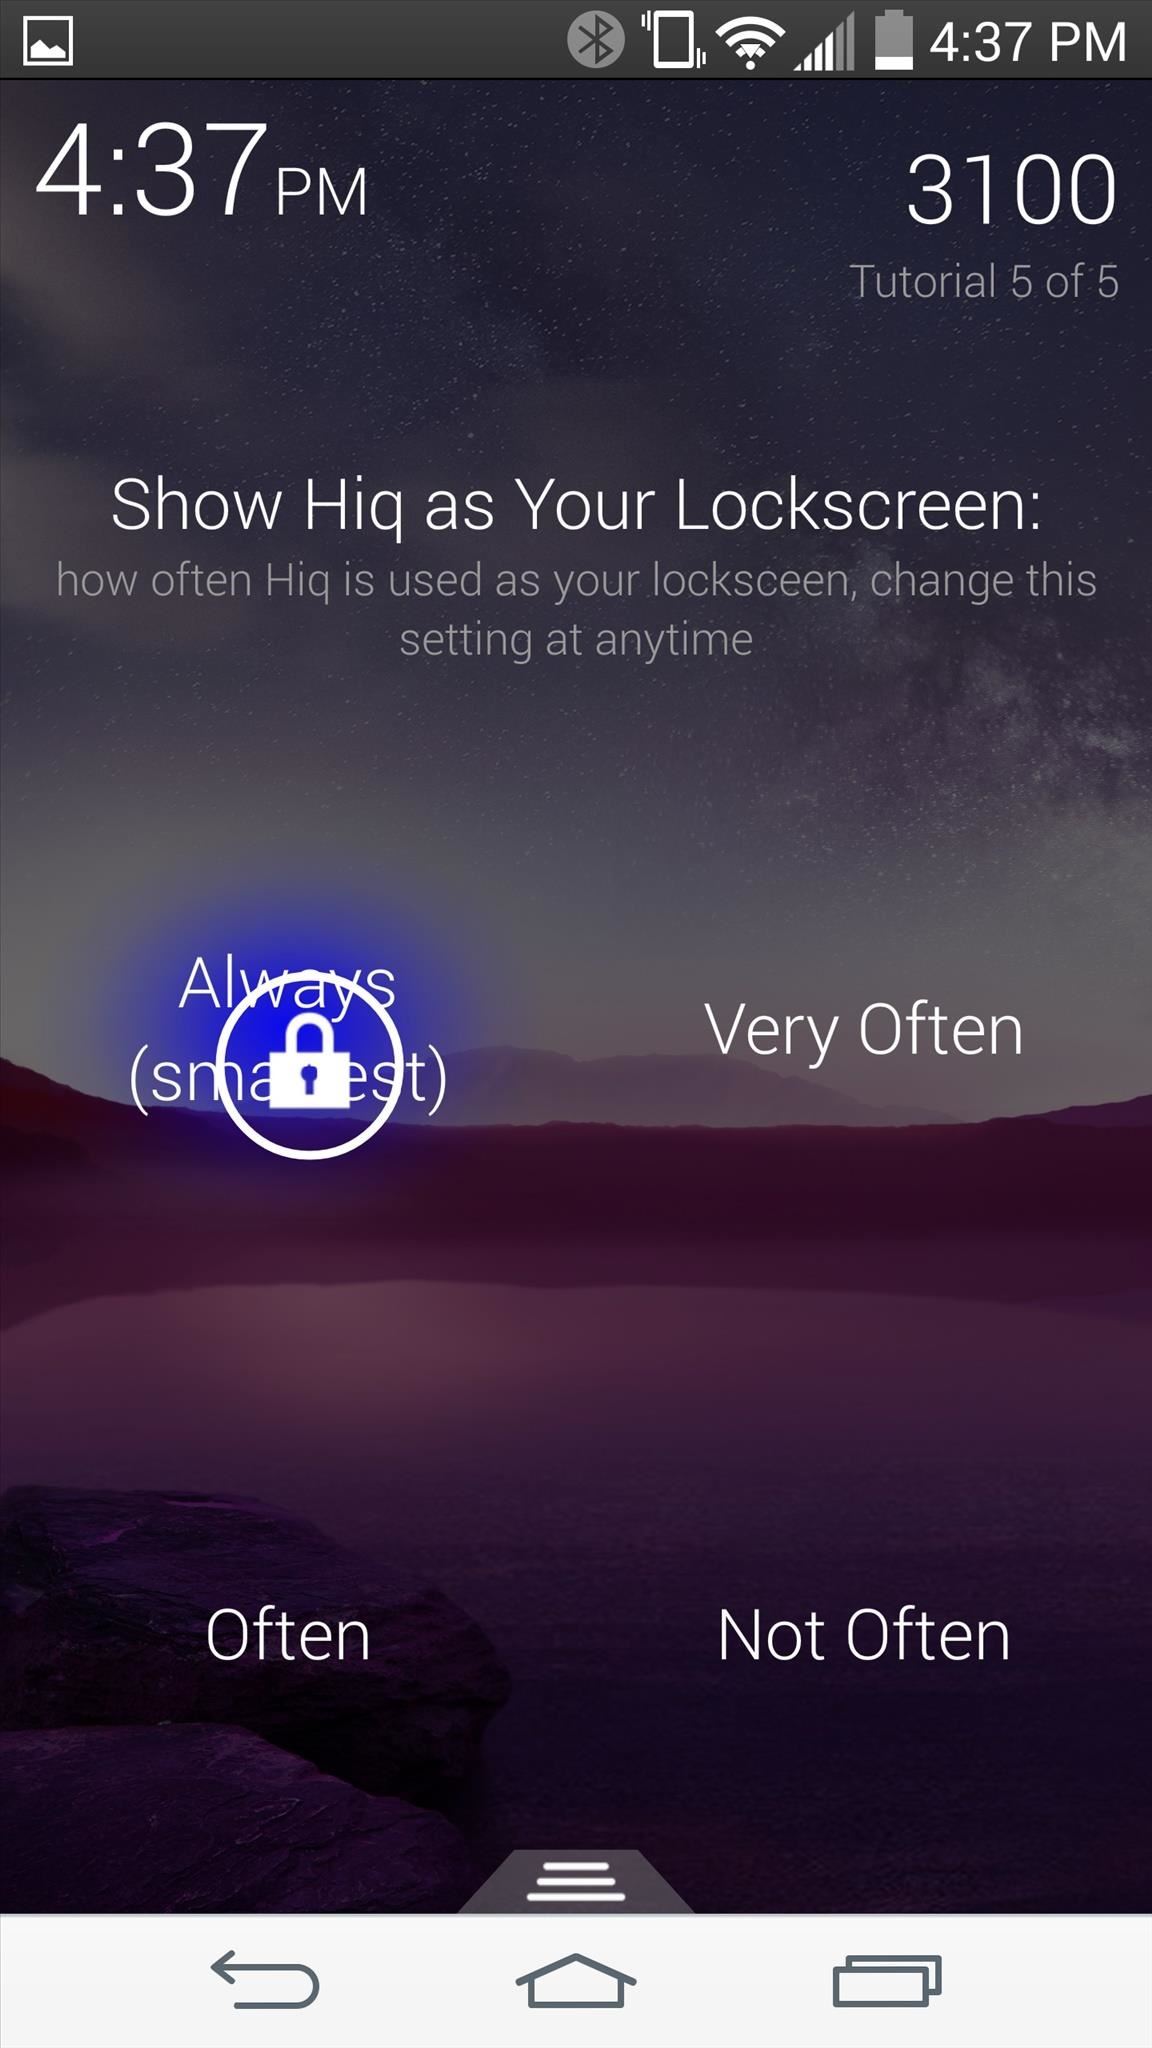 Get Smarter Every Time You Unlock Your LG G3 or Other Android Phone